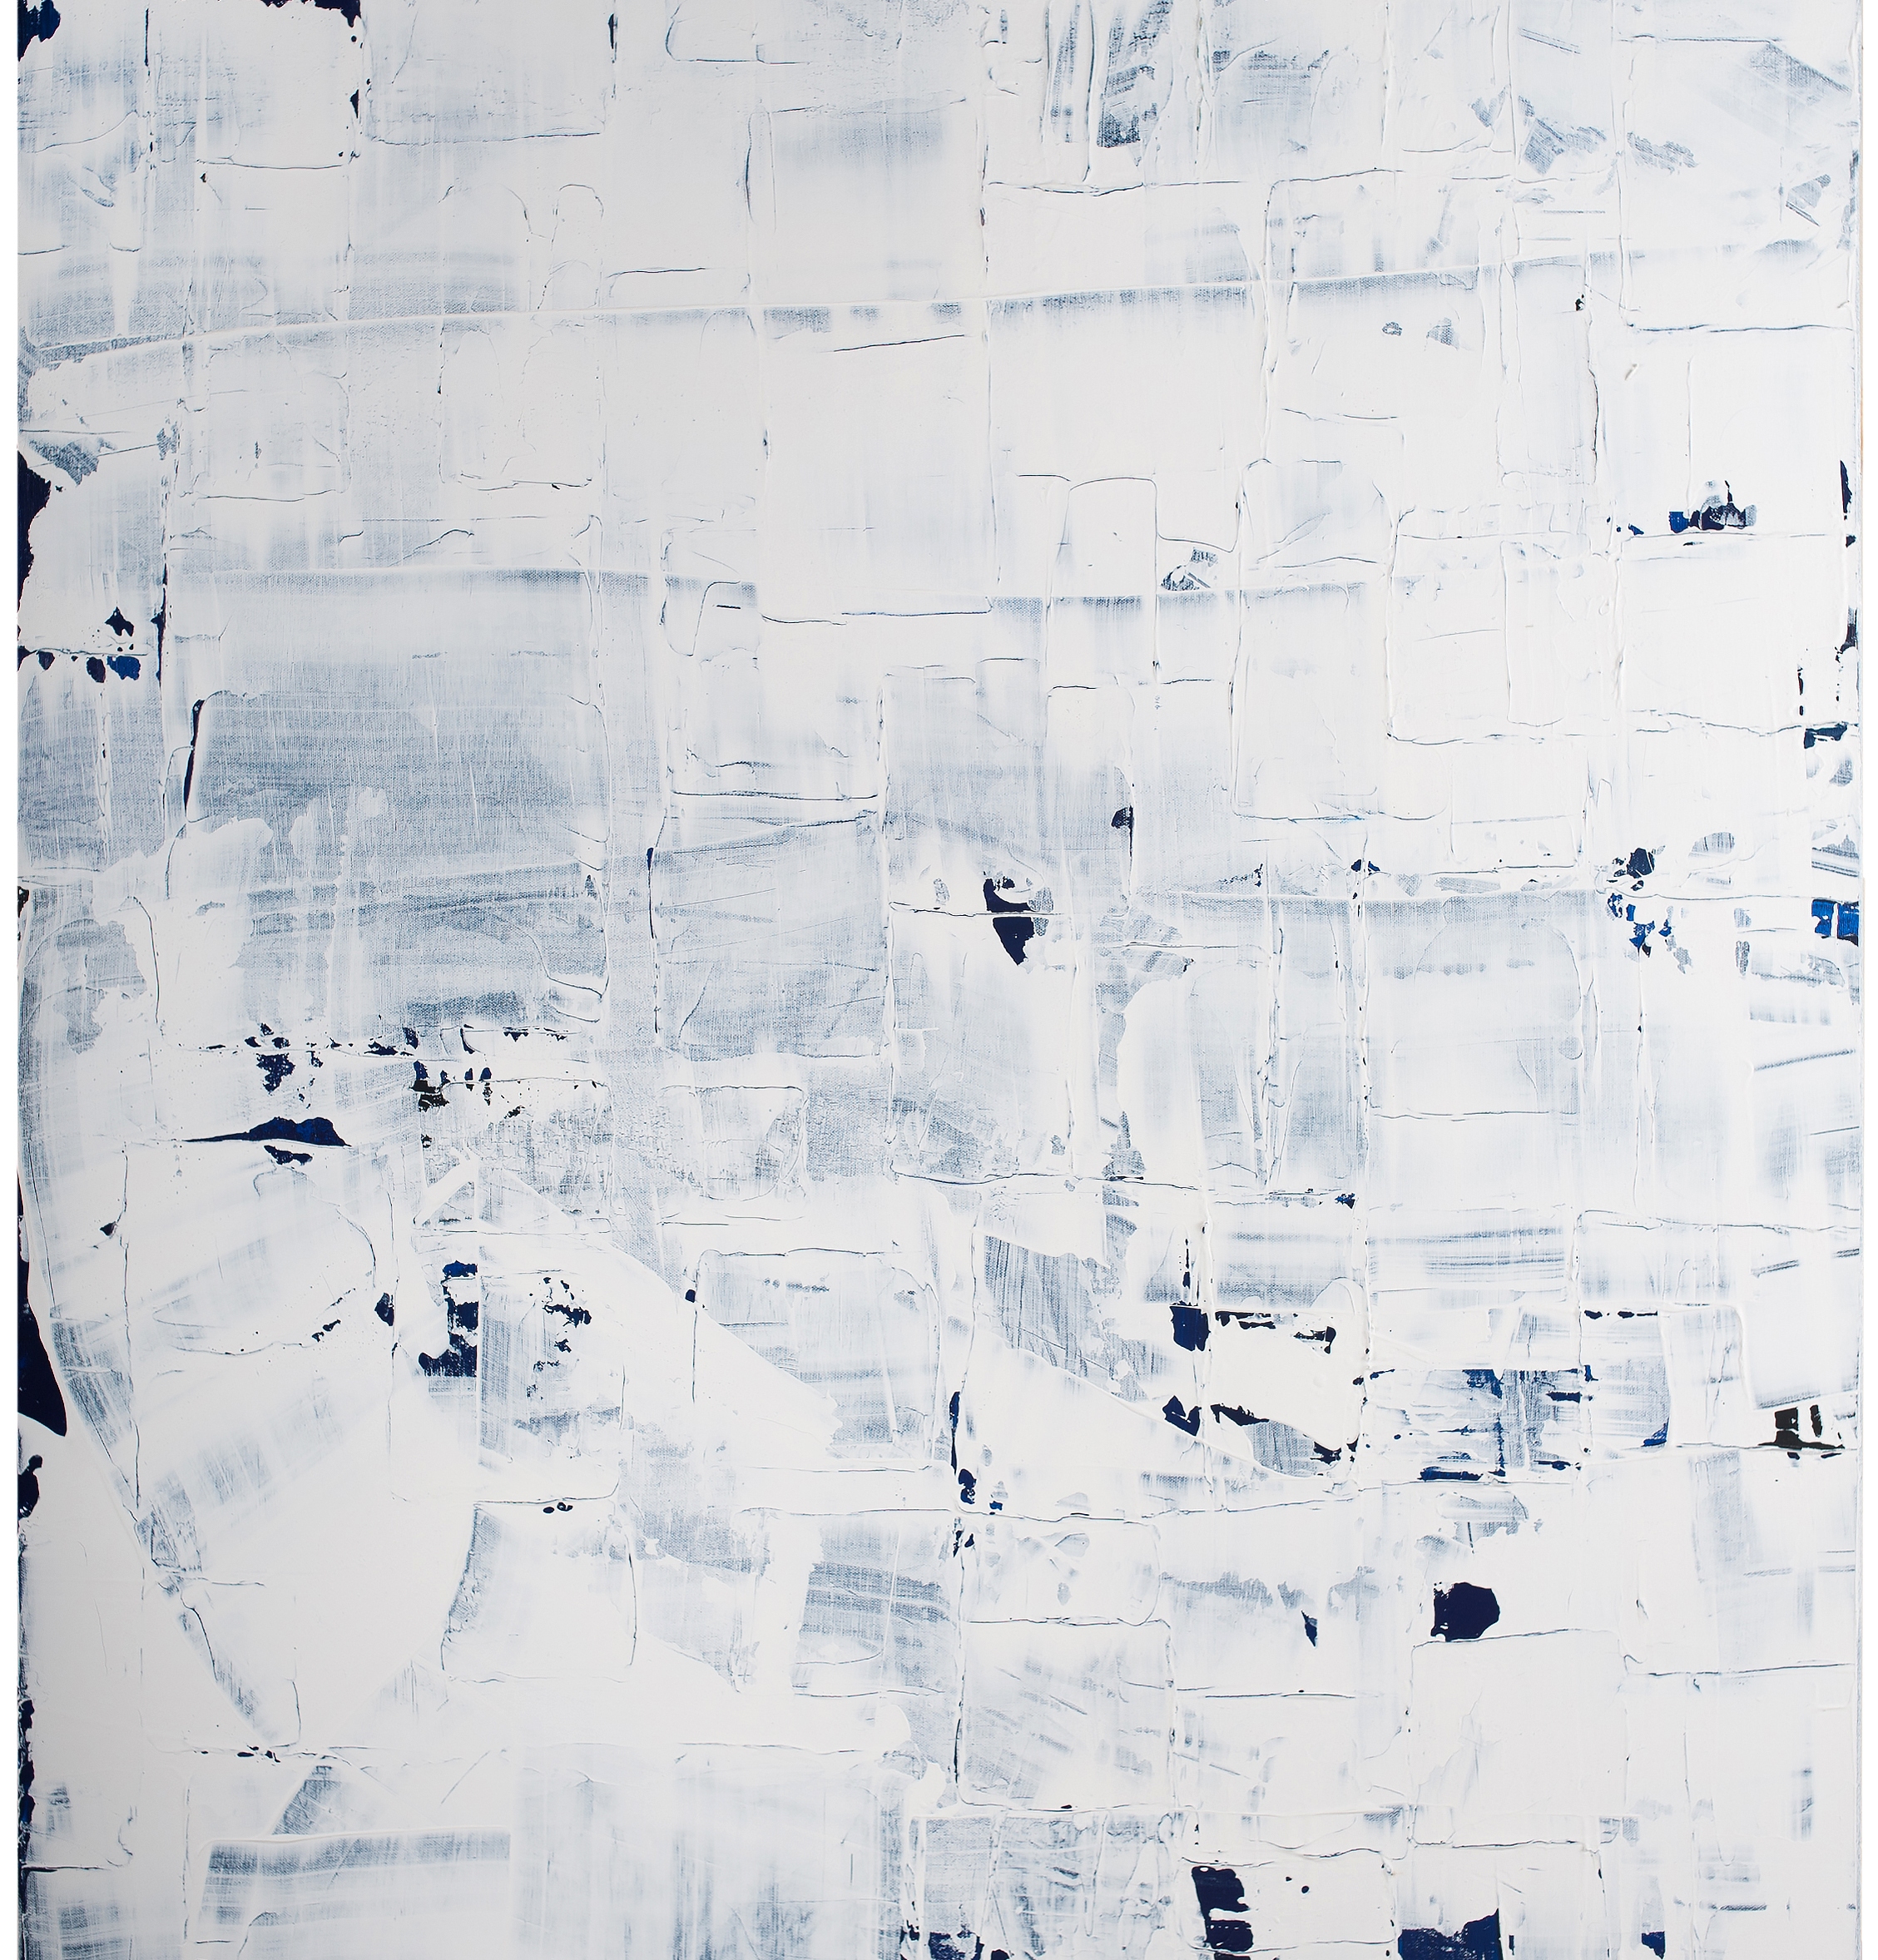 CANVAS WoBLUE #1 36x48 in